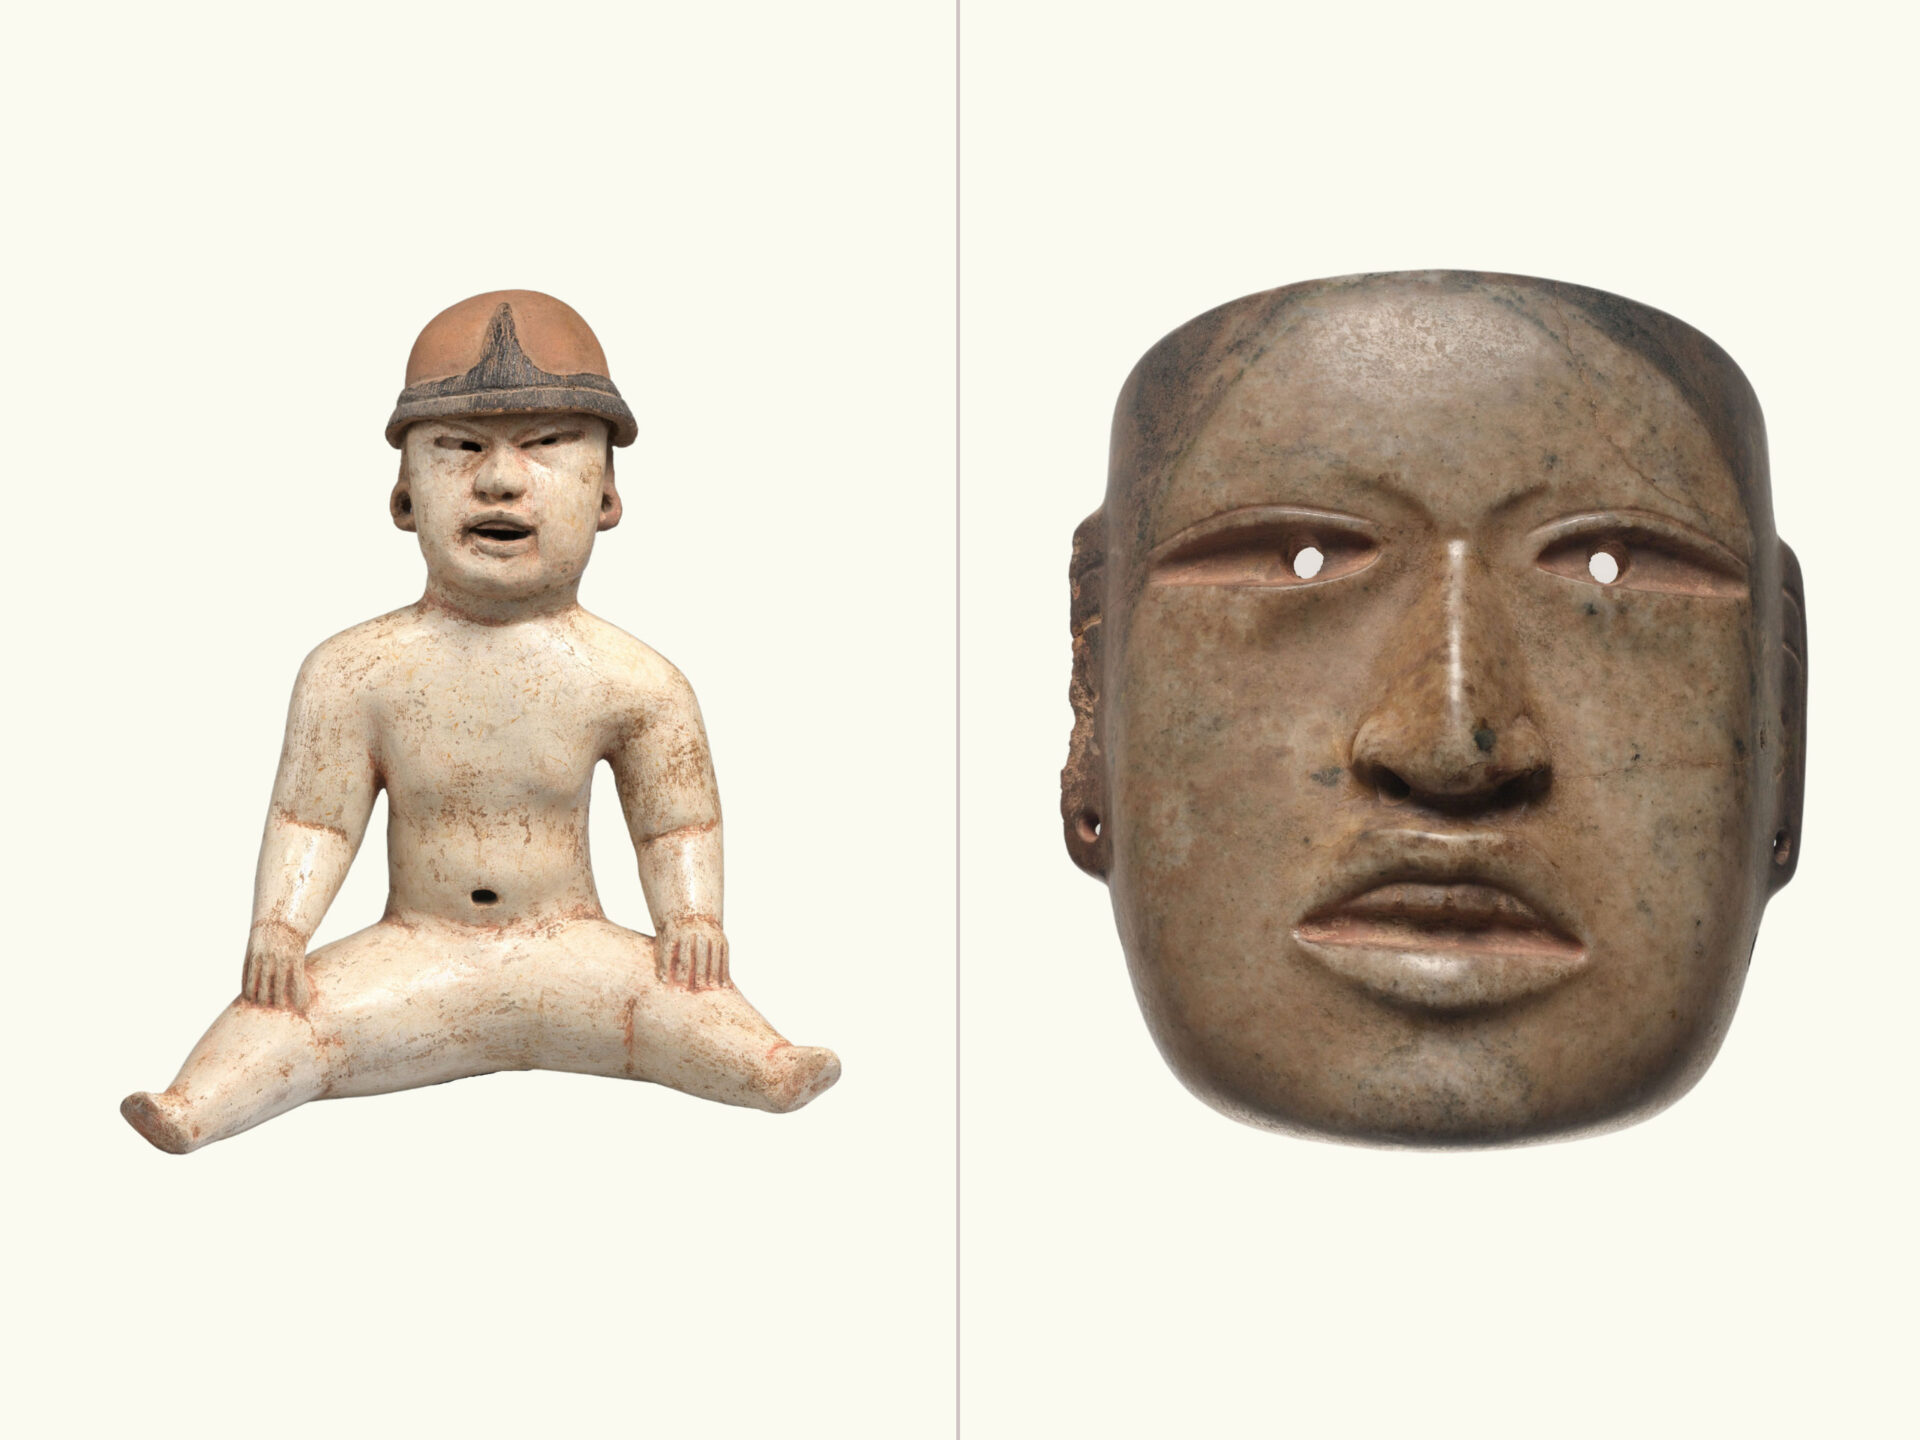 A comparison of two objects: white seated ceramic figure of a baby (left) and a brown stone mask with large nose and defined lips (right).